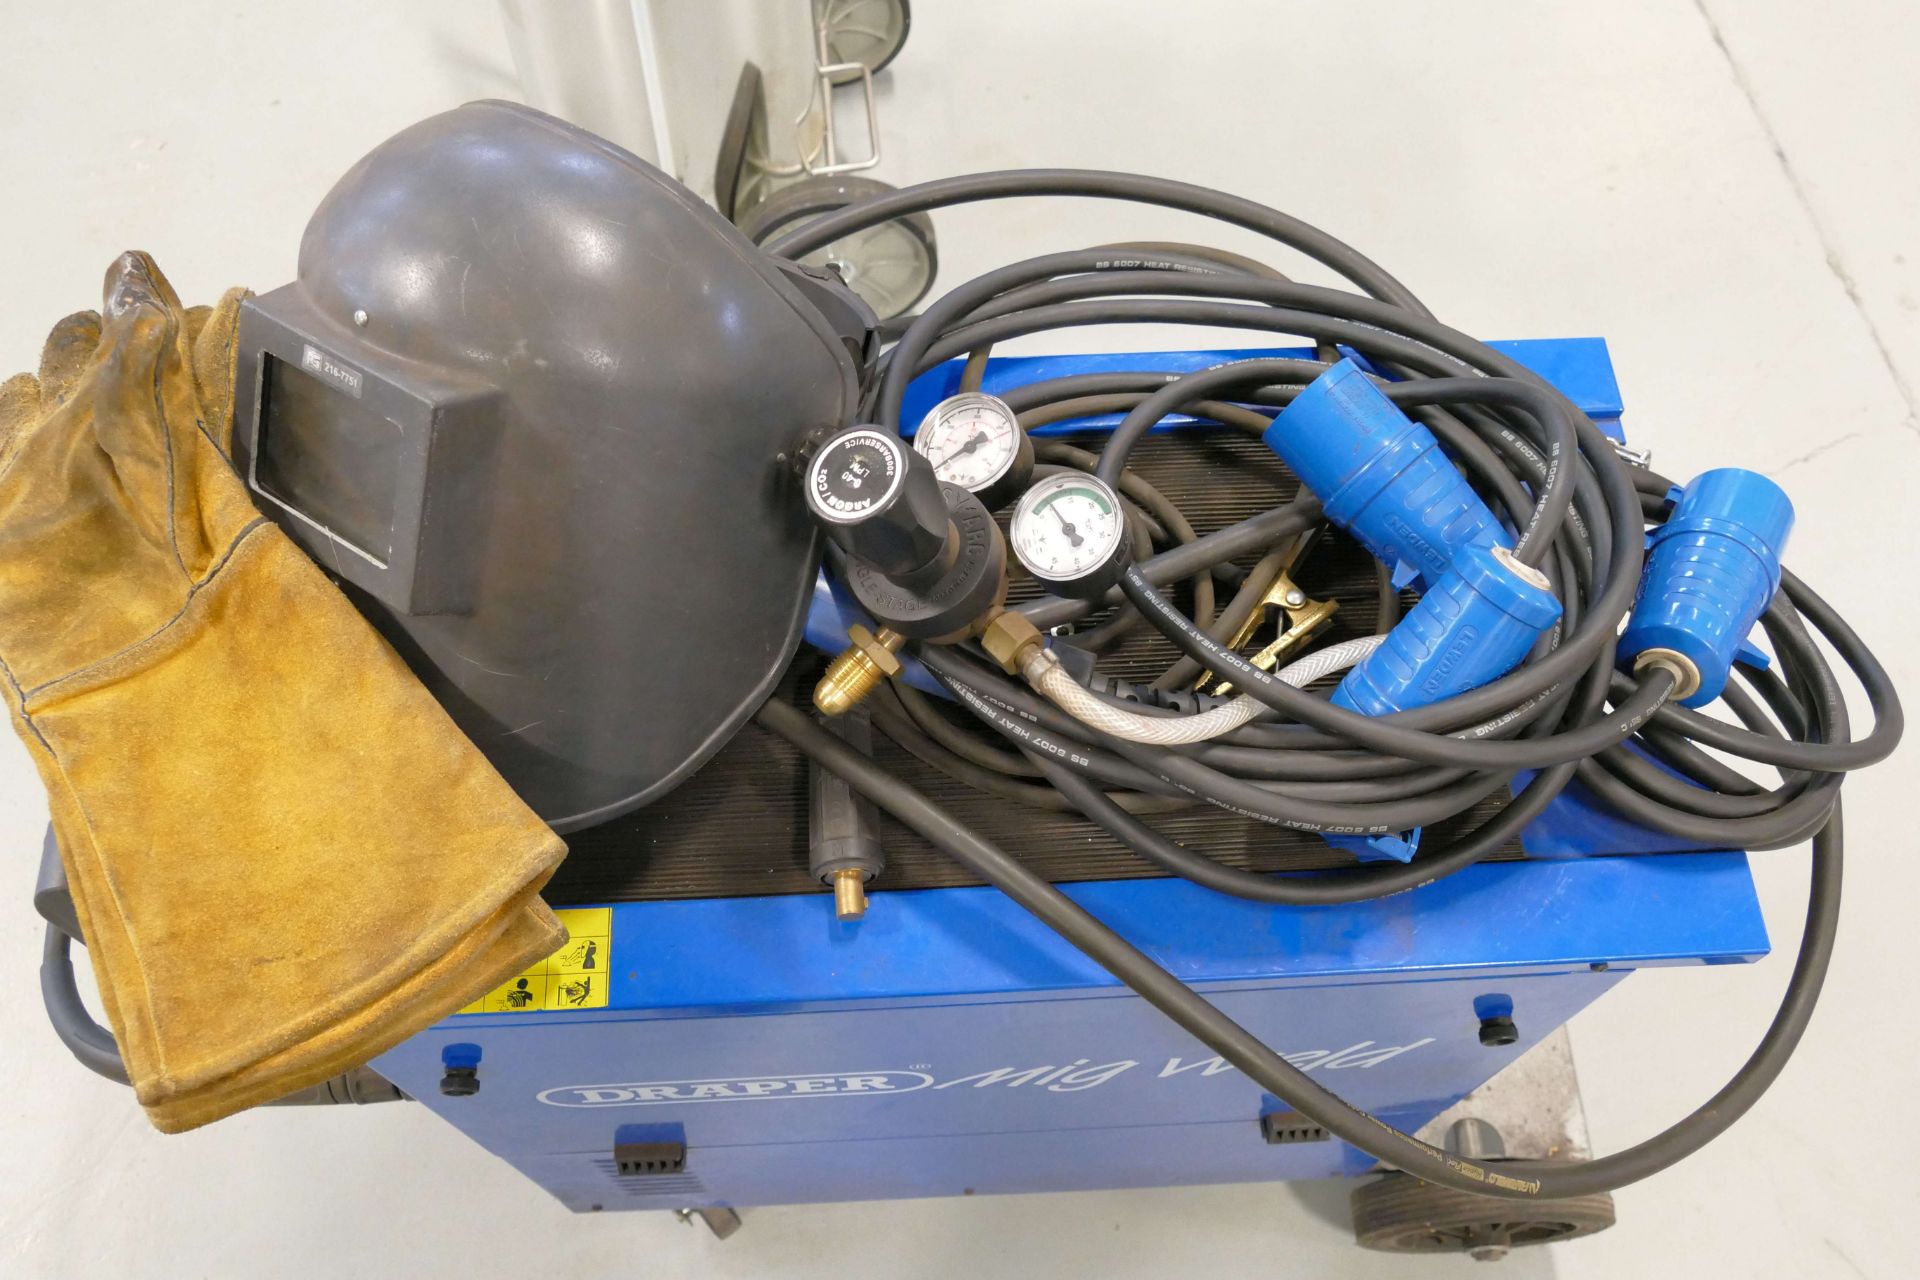 Draper 2300T TURBO MIG WELDING UNIT, serial no. N538292, with assorted gauges, gloves and mask - Image 3 of 6